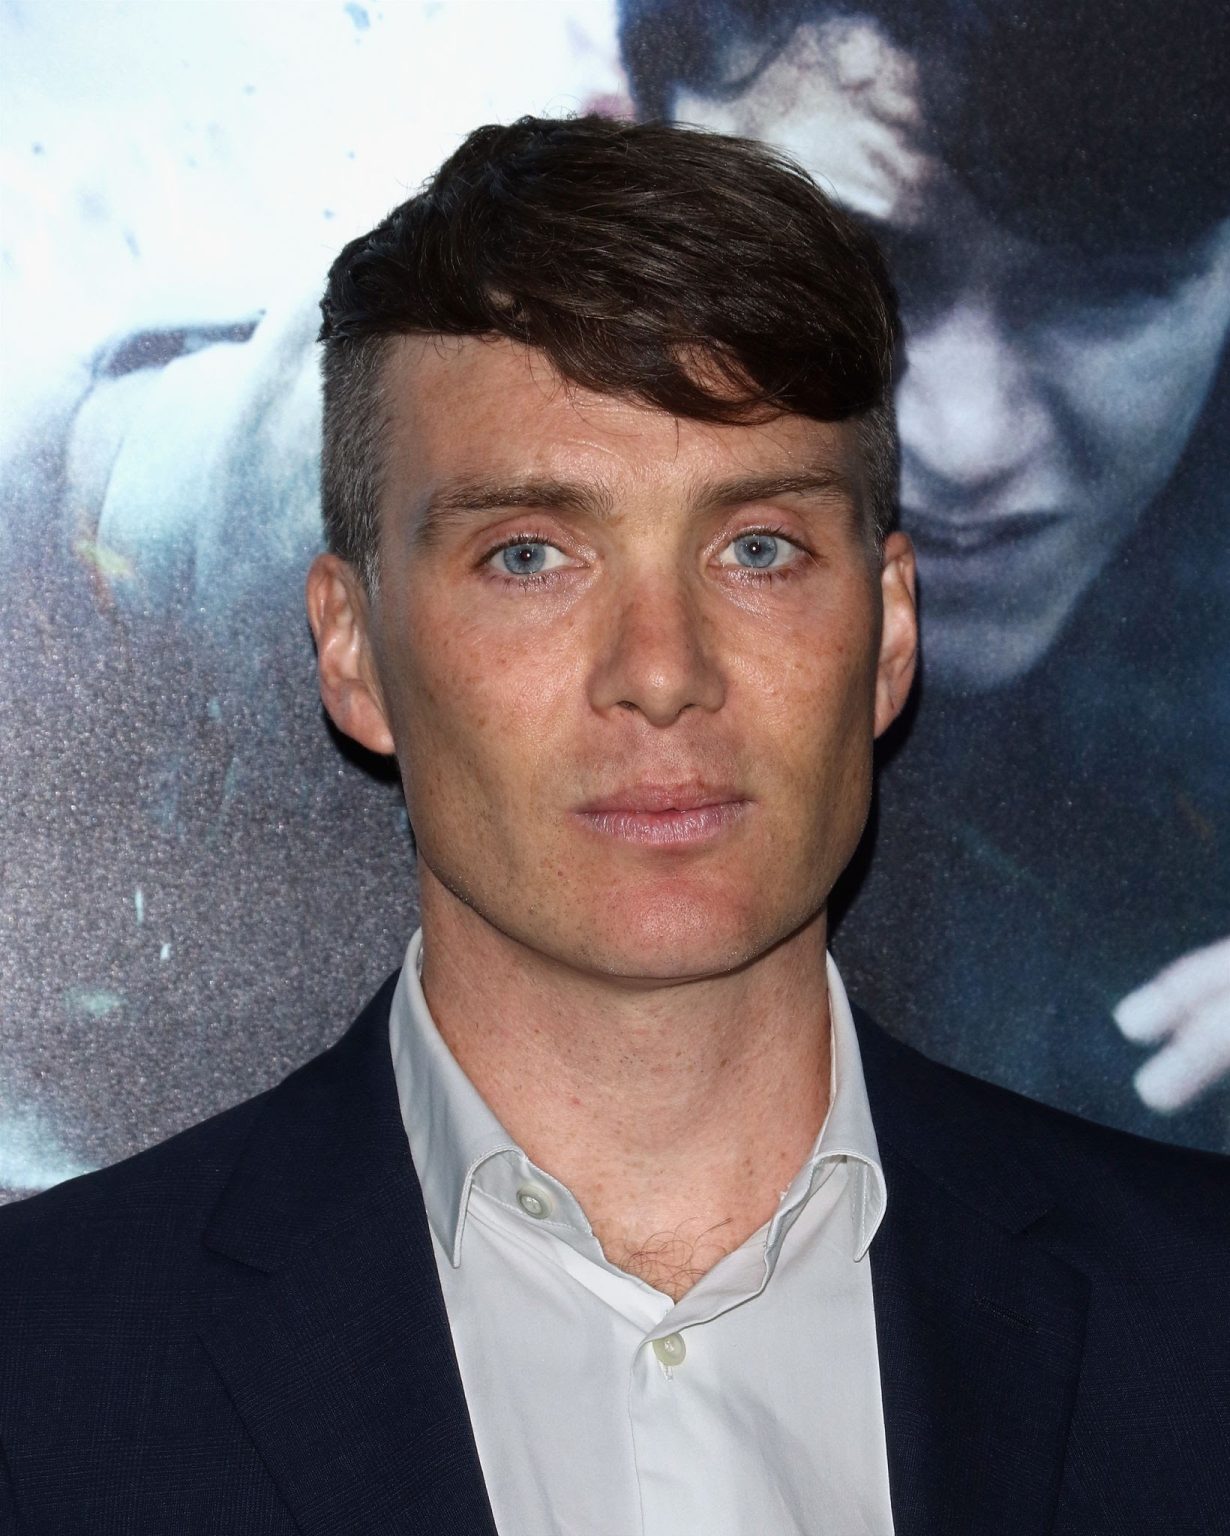 Does Cillian Murphy have a son? Is Cillian Murphy currently married? ABTC